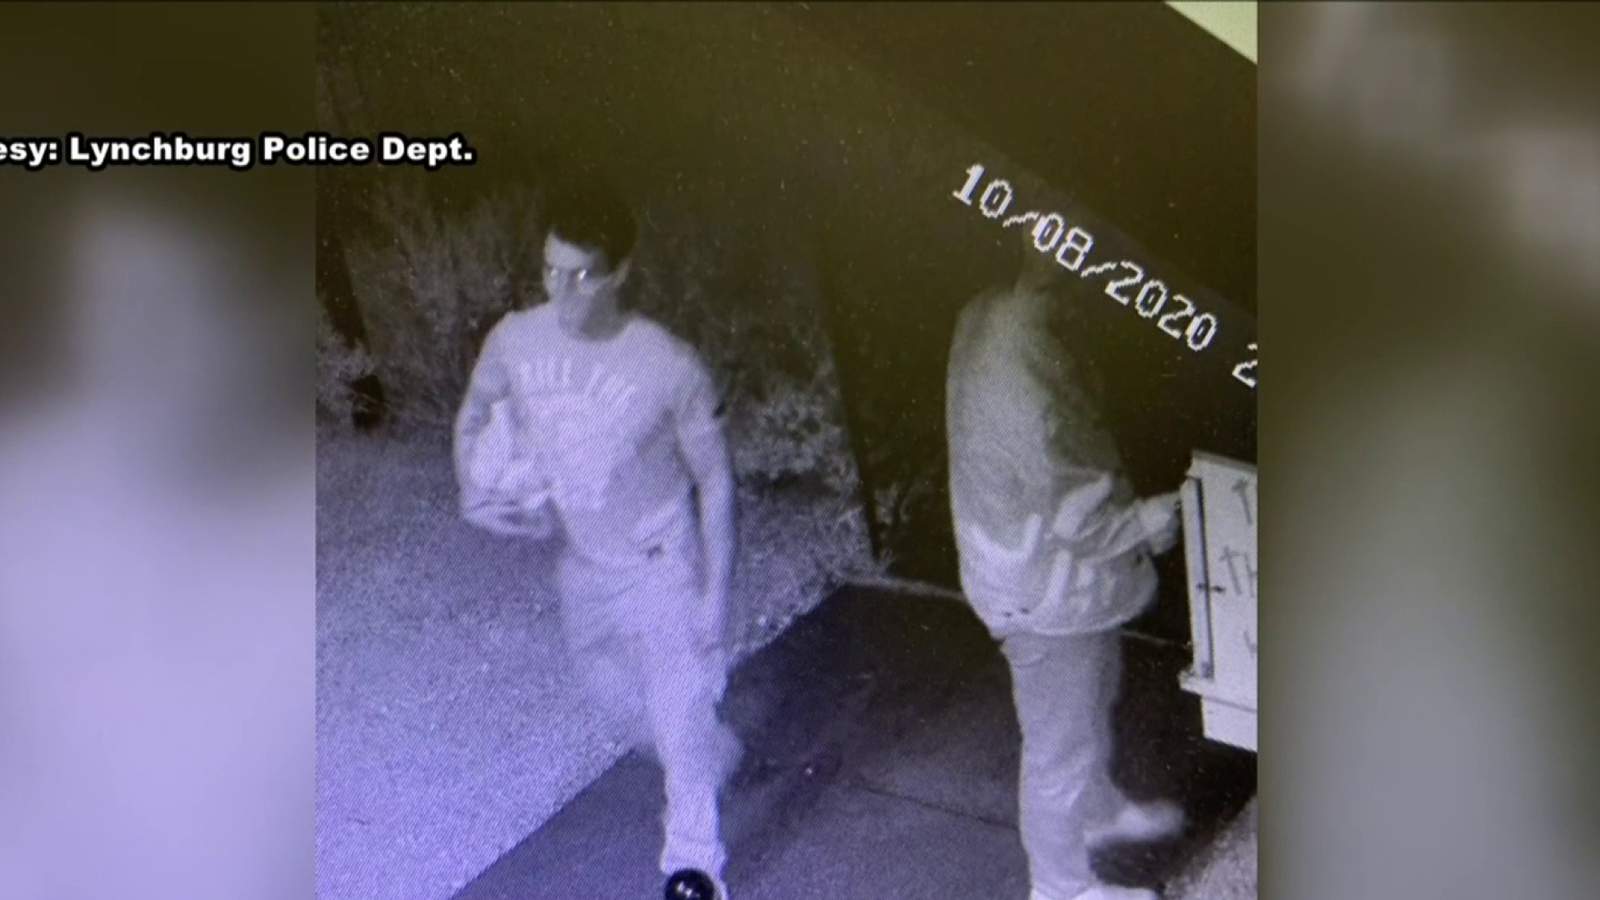 Police searching for two people in connection with Lynchburg church vandalism involving white supremacy sticker